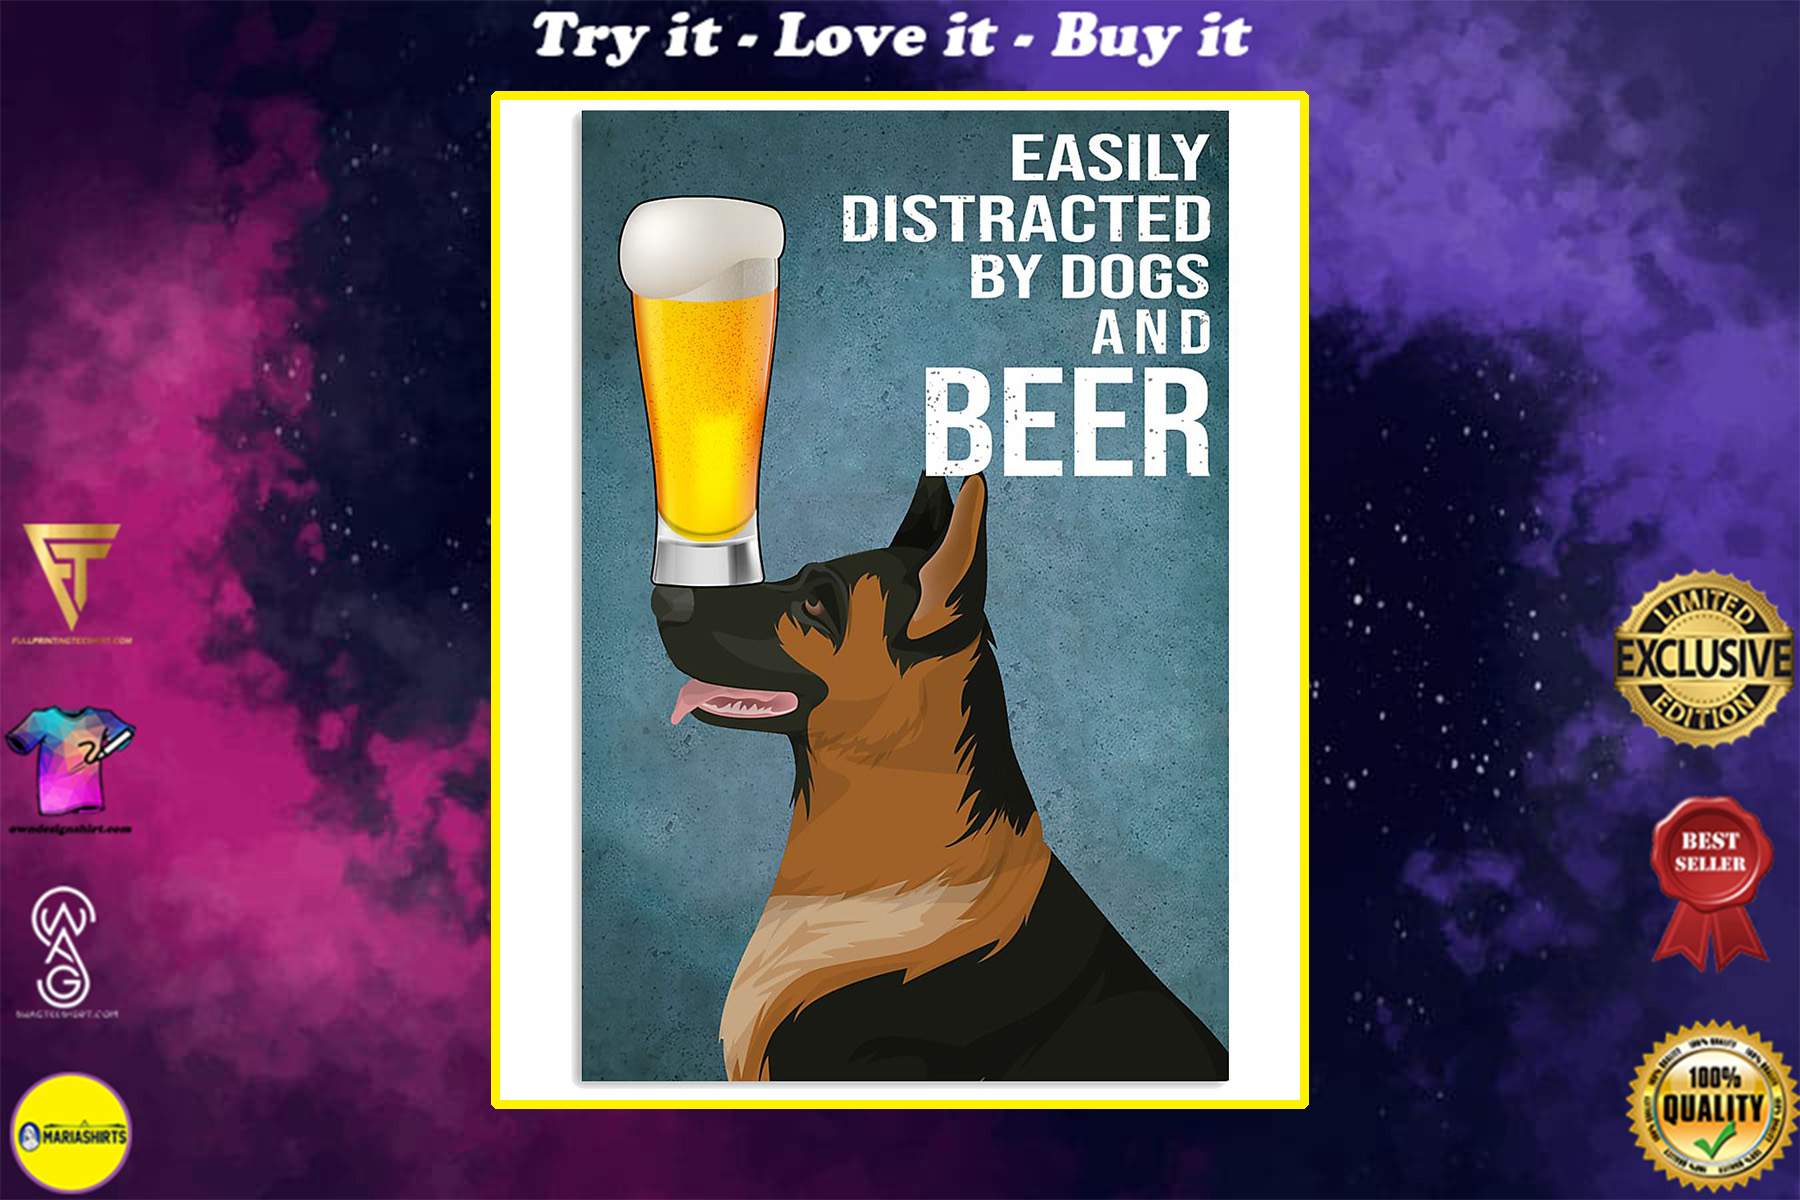 german shepherd easily distracted by dogs and beer poster